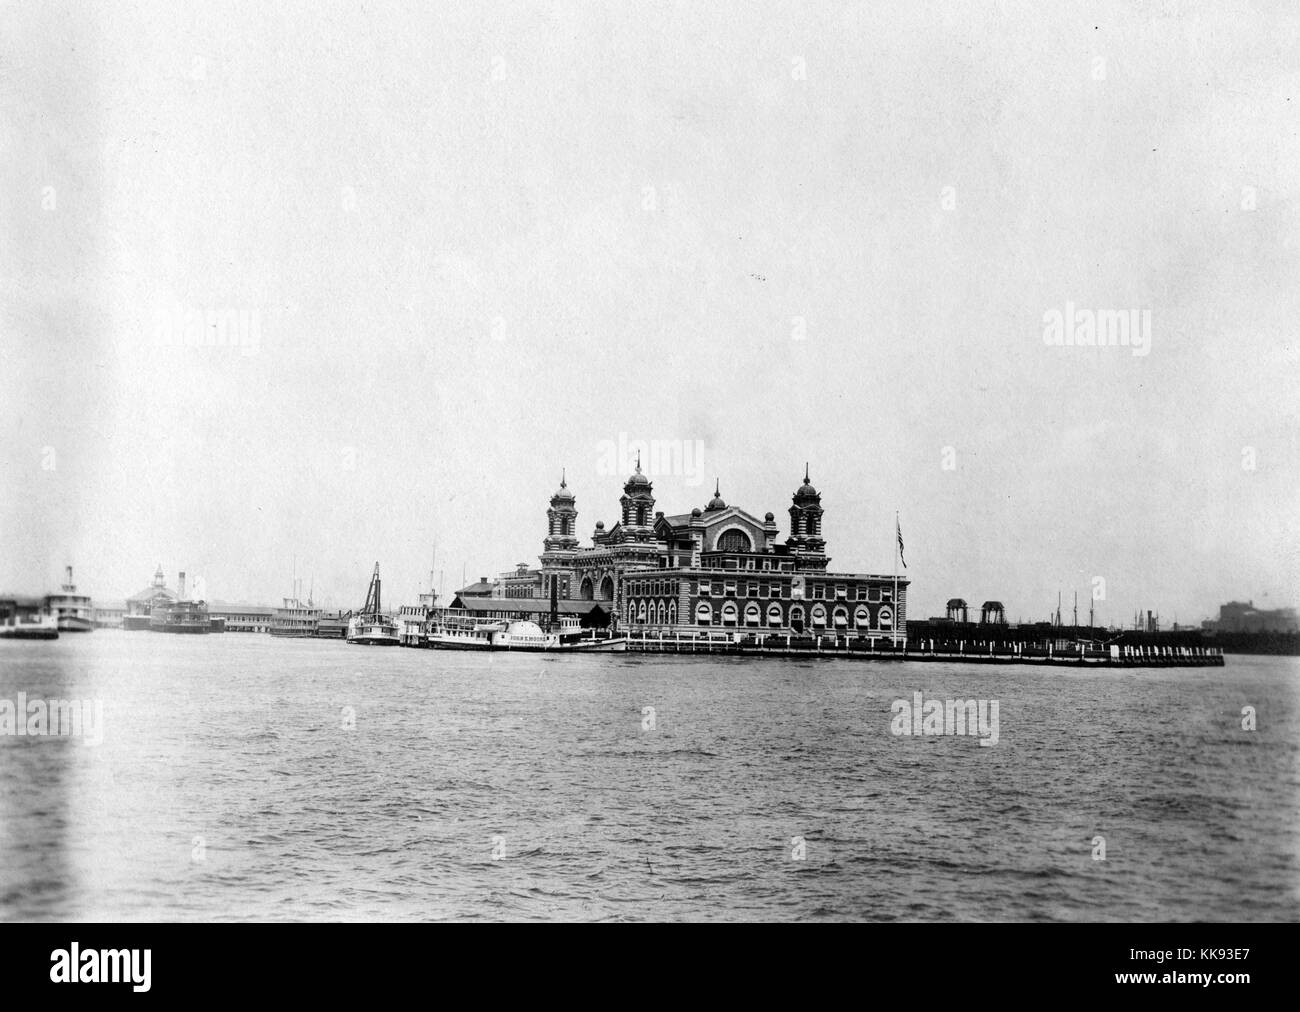 A photograph taken from the Upper New York Bay of the exterior of the Ellis Island immigration inspection station, the French Renaissance Revival building is constructed with red bricks and limestone trim, the building was first opened on December 17, 1900, it was closed in 1954 after processing over 12 million immigrants entering the United States, towers can be seen at the corners of the central portion of the structure, New York, 1907. From the New York Public Library. Stock Photo